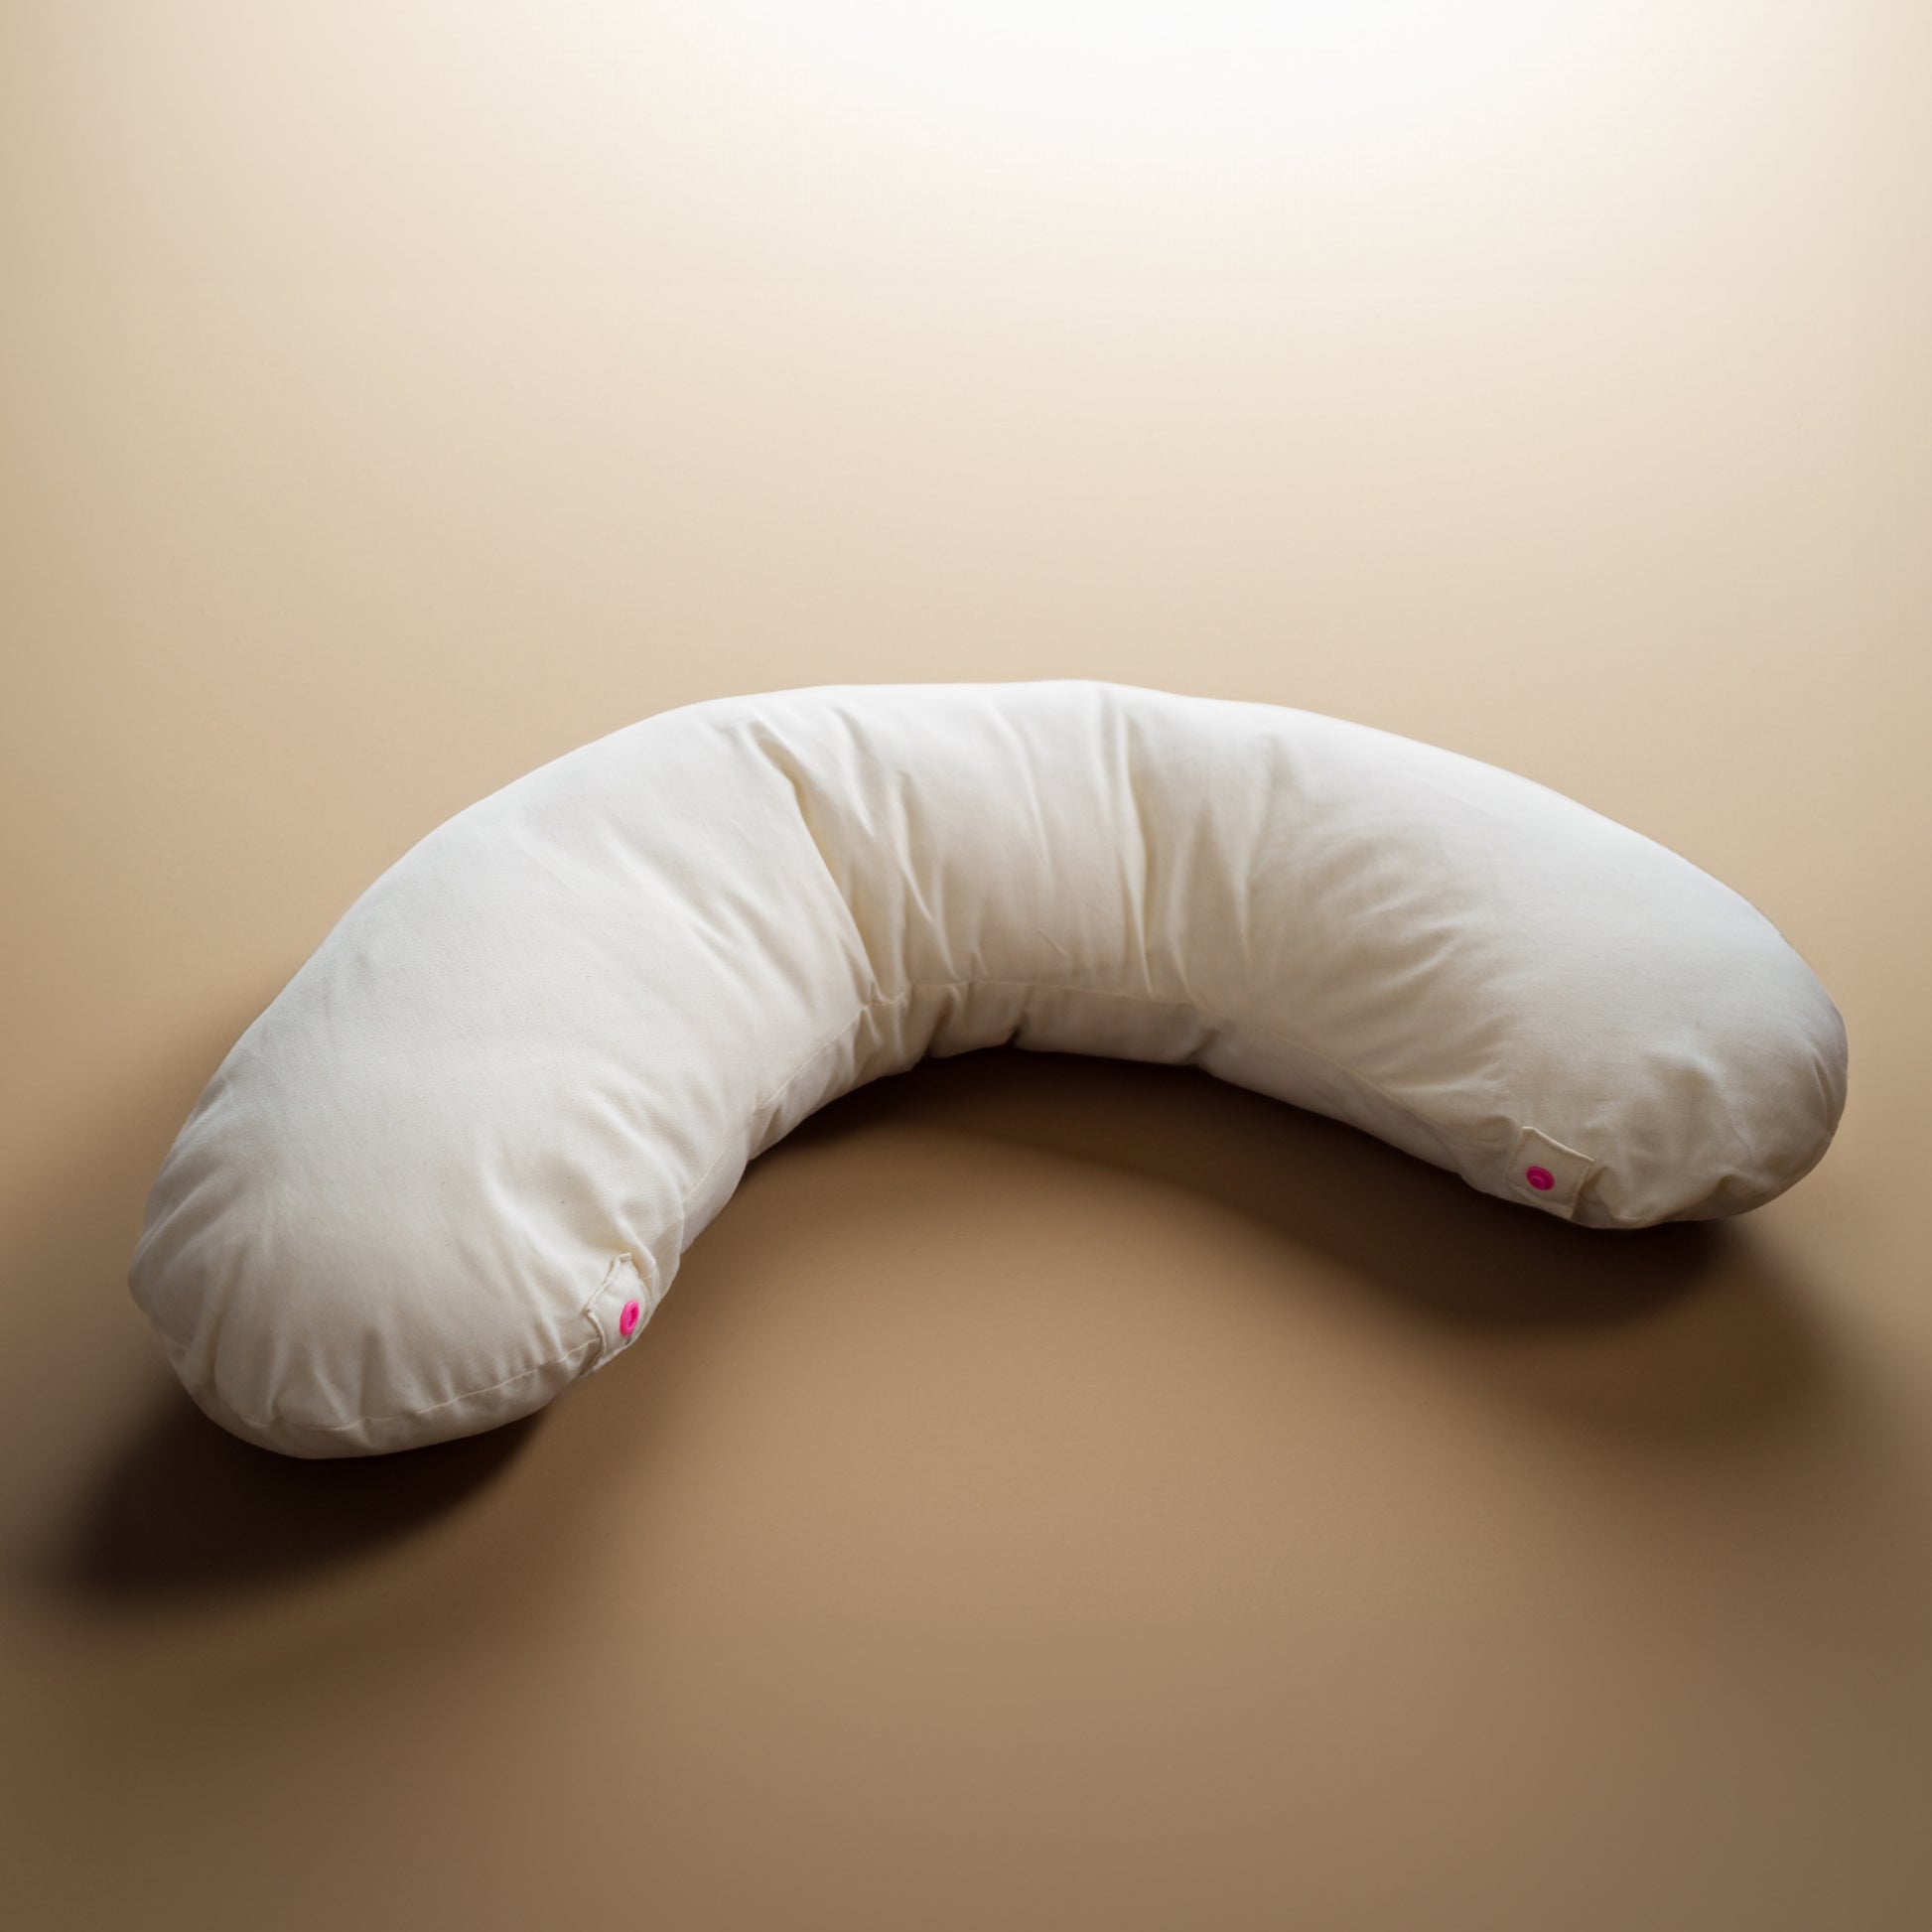 The bubble puff pillow is shaped like a "puff" and is naturally curved 